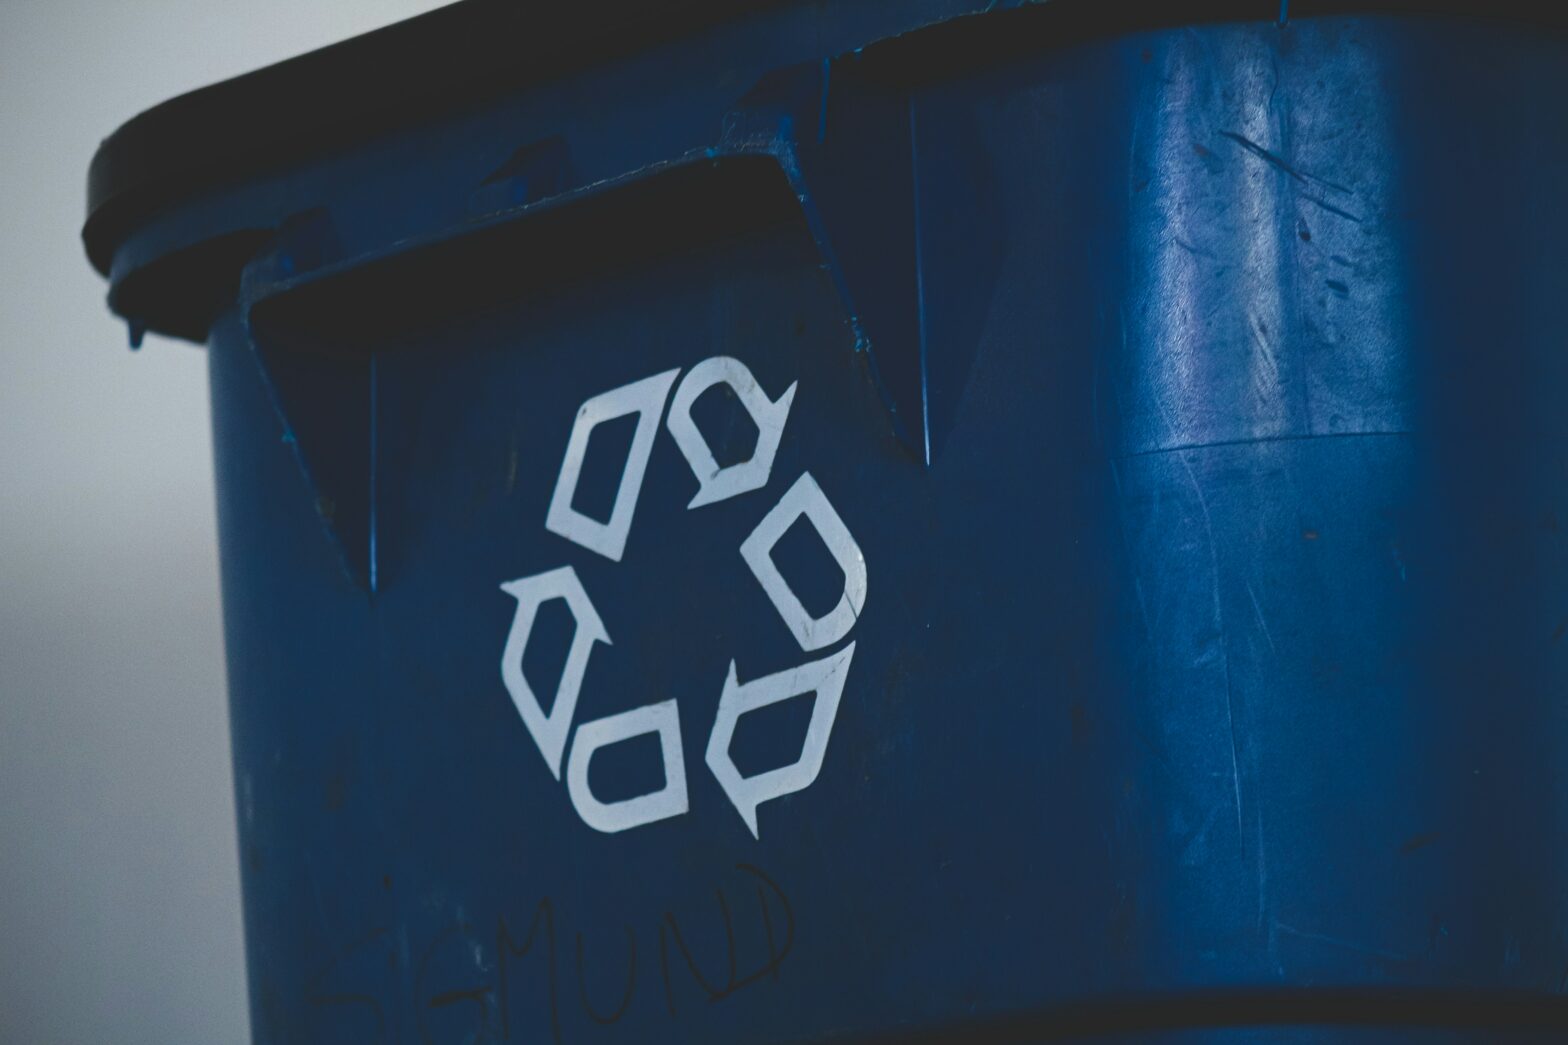 Blog-Eco-Friendly Waste Management Solutions for a Circular Economy